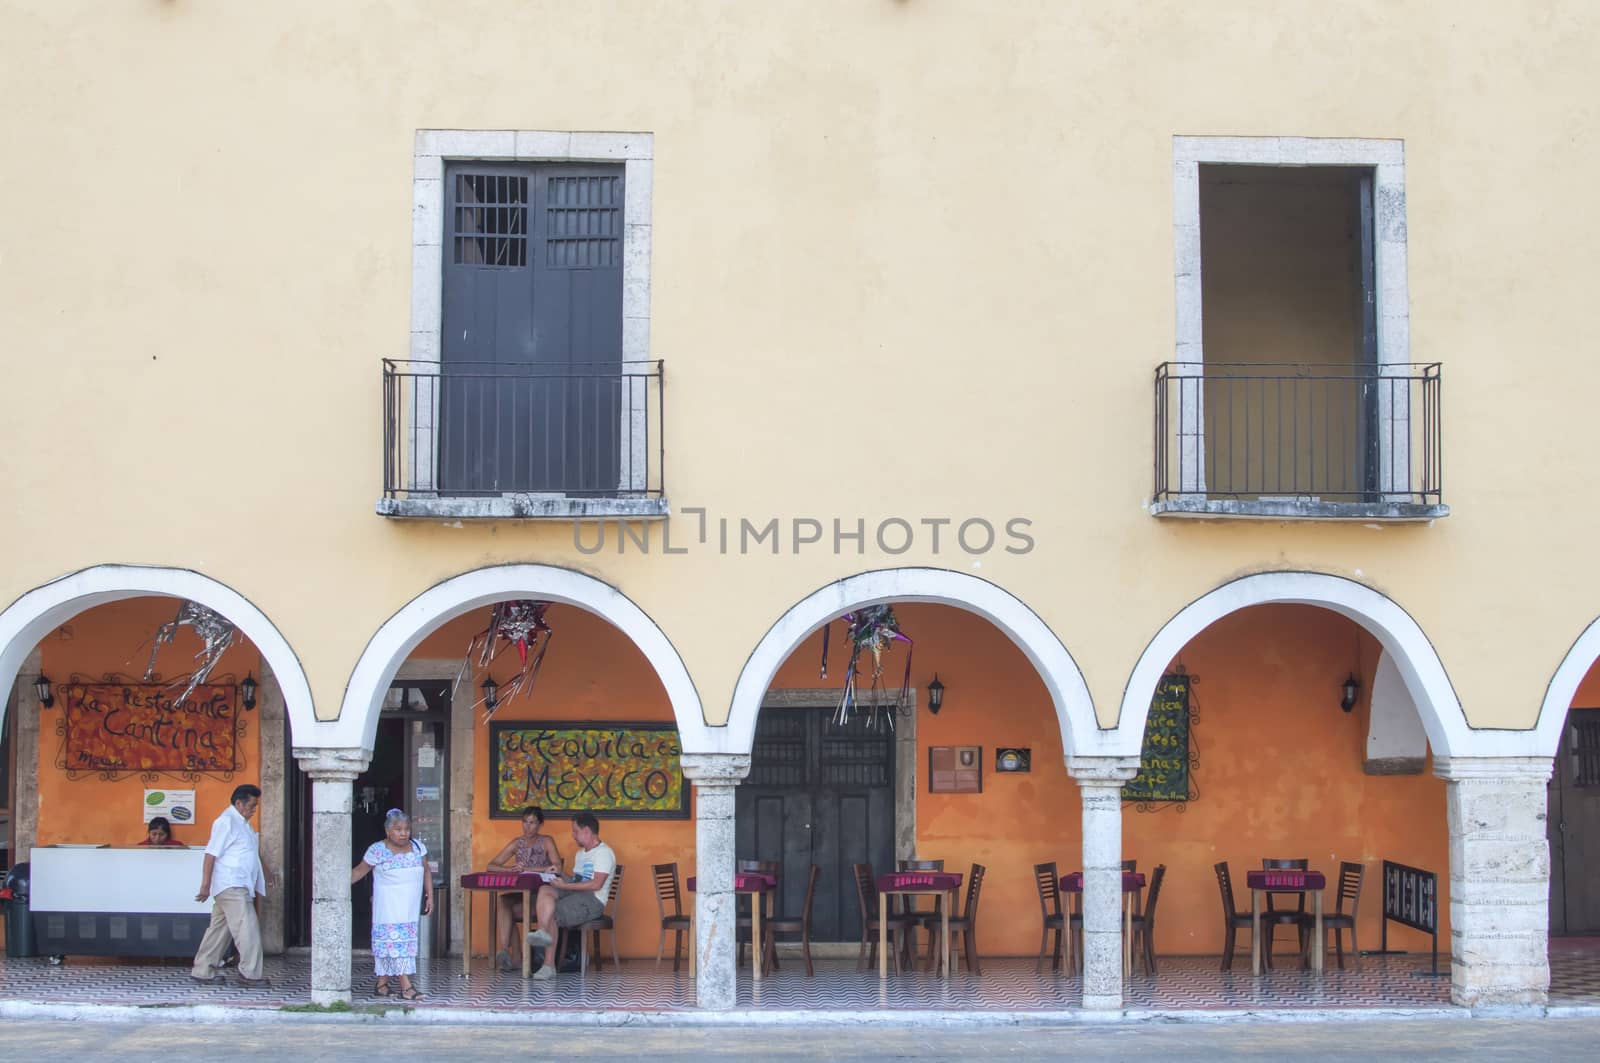 VALLADOLID, MEXICO - JANUARY 20, 2015: Columns and arches form the patio of La Cantina restaurant in Valladolid, Mexico, a colonial style restaurant in the center of the town